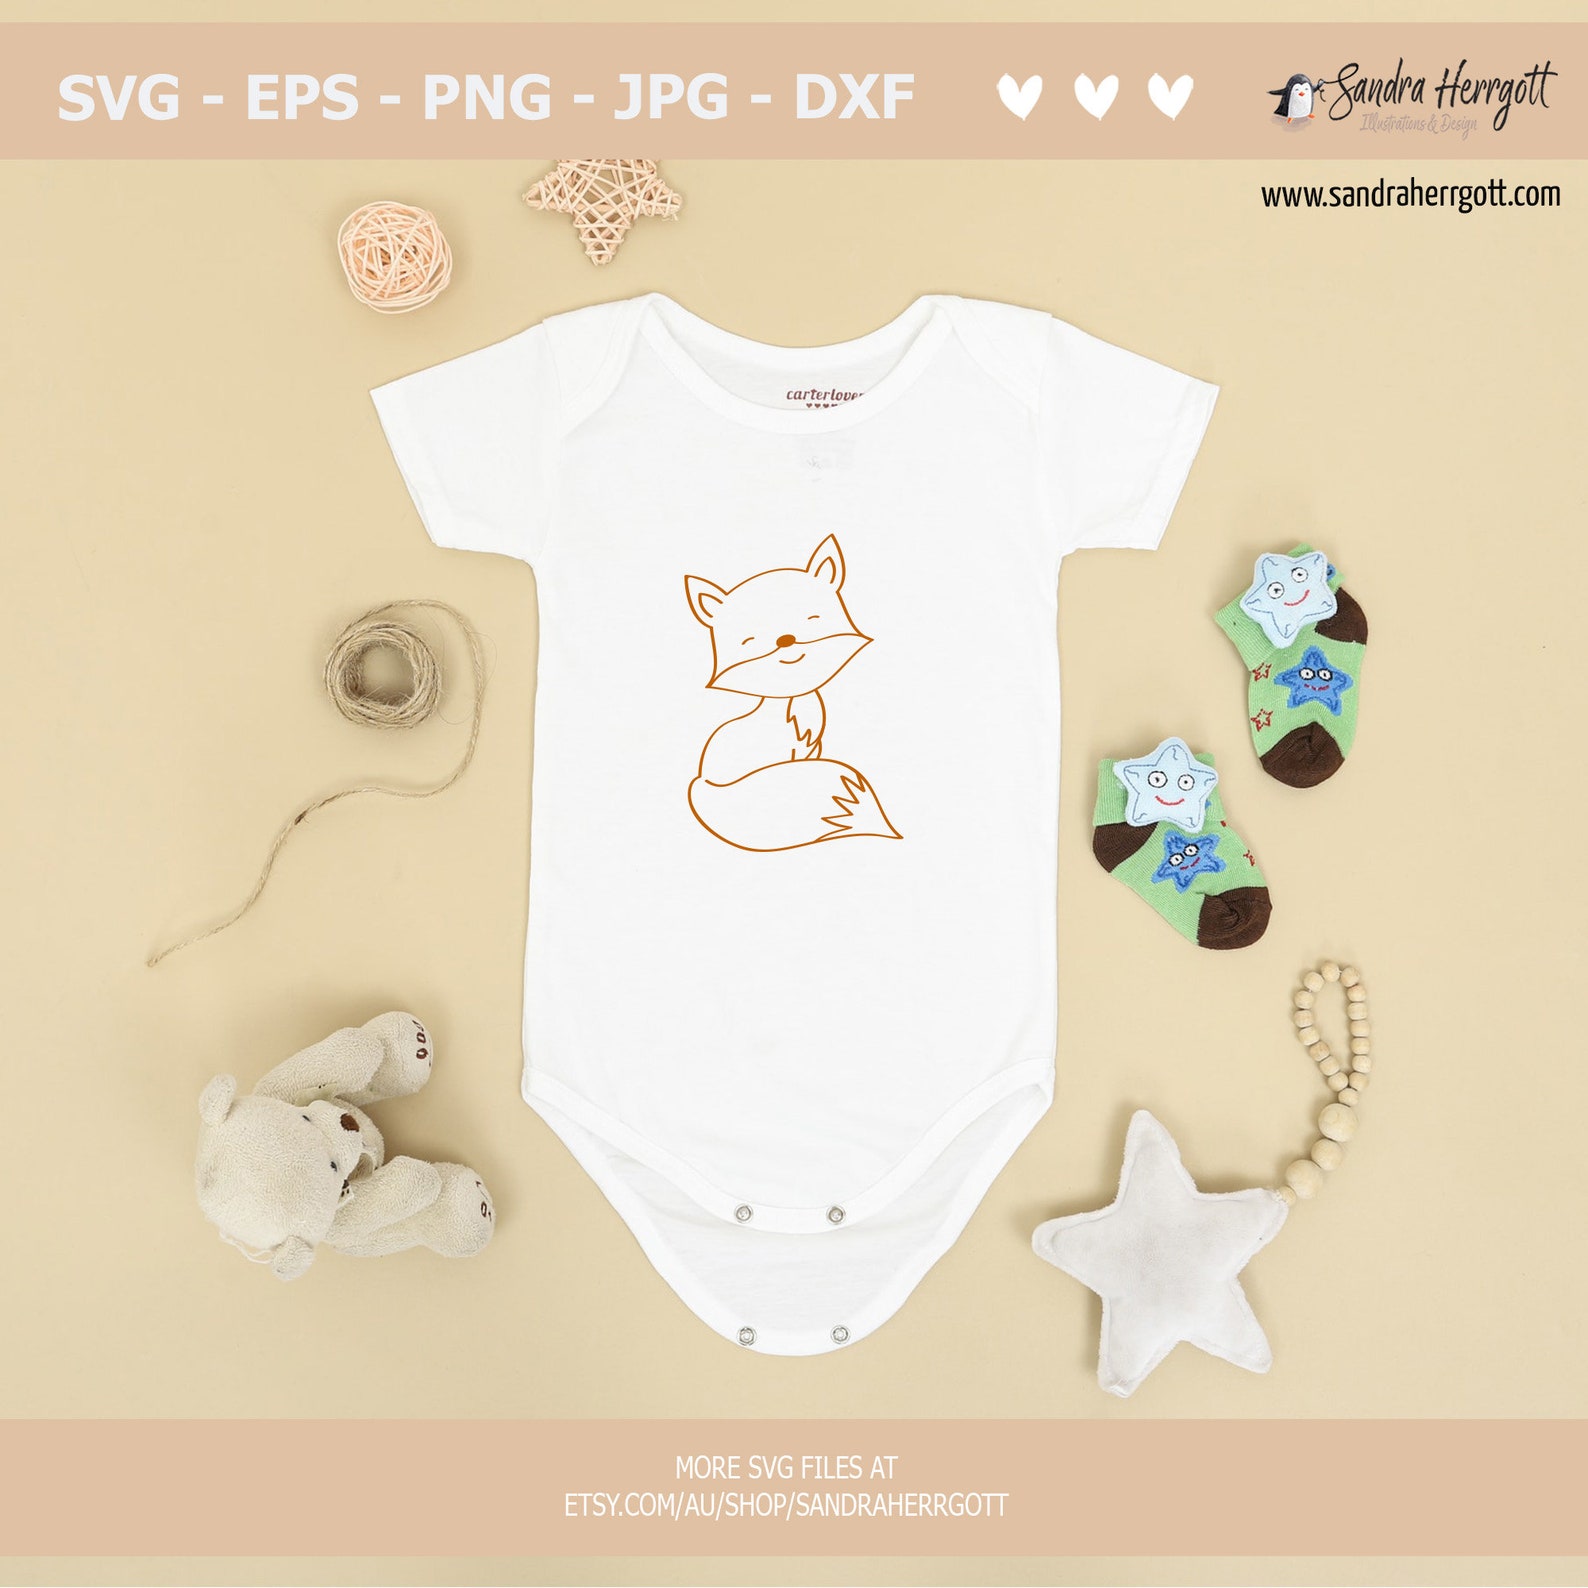 Use this bundle for your baby clothes.